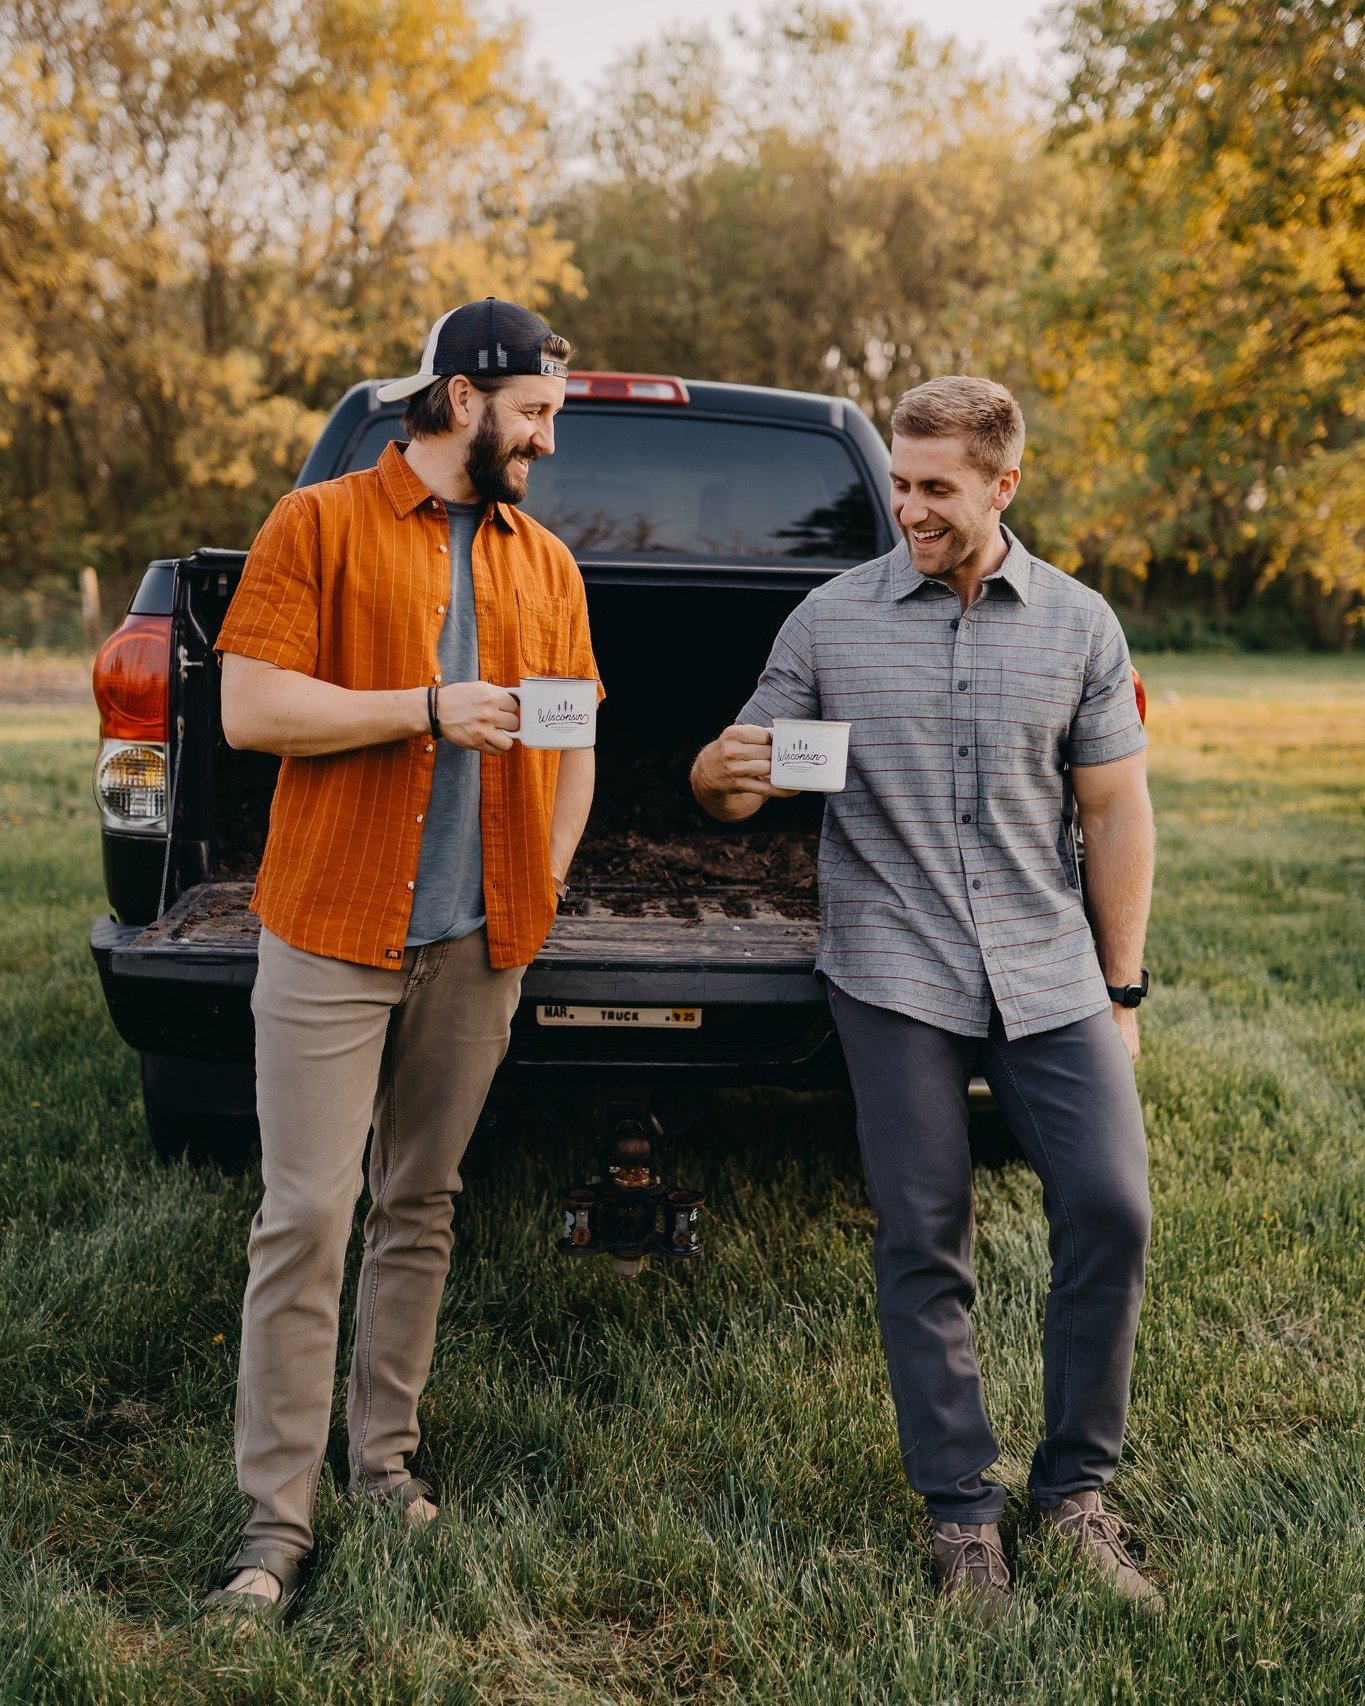 Cheers to Friday!

Stop in to see us this weekend and explore our latest inventory of premium products &amp; apparel for men! 

shoutout to our amazing photographer @_kelsey_jonas 

She crushed this photoshoot, showing off everything John Scott Men's